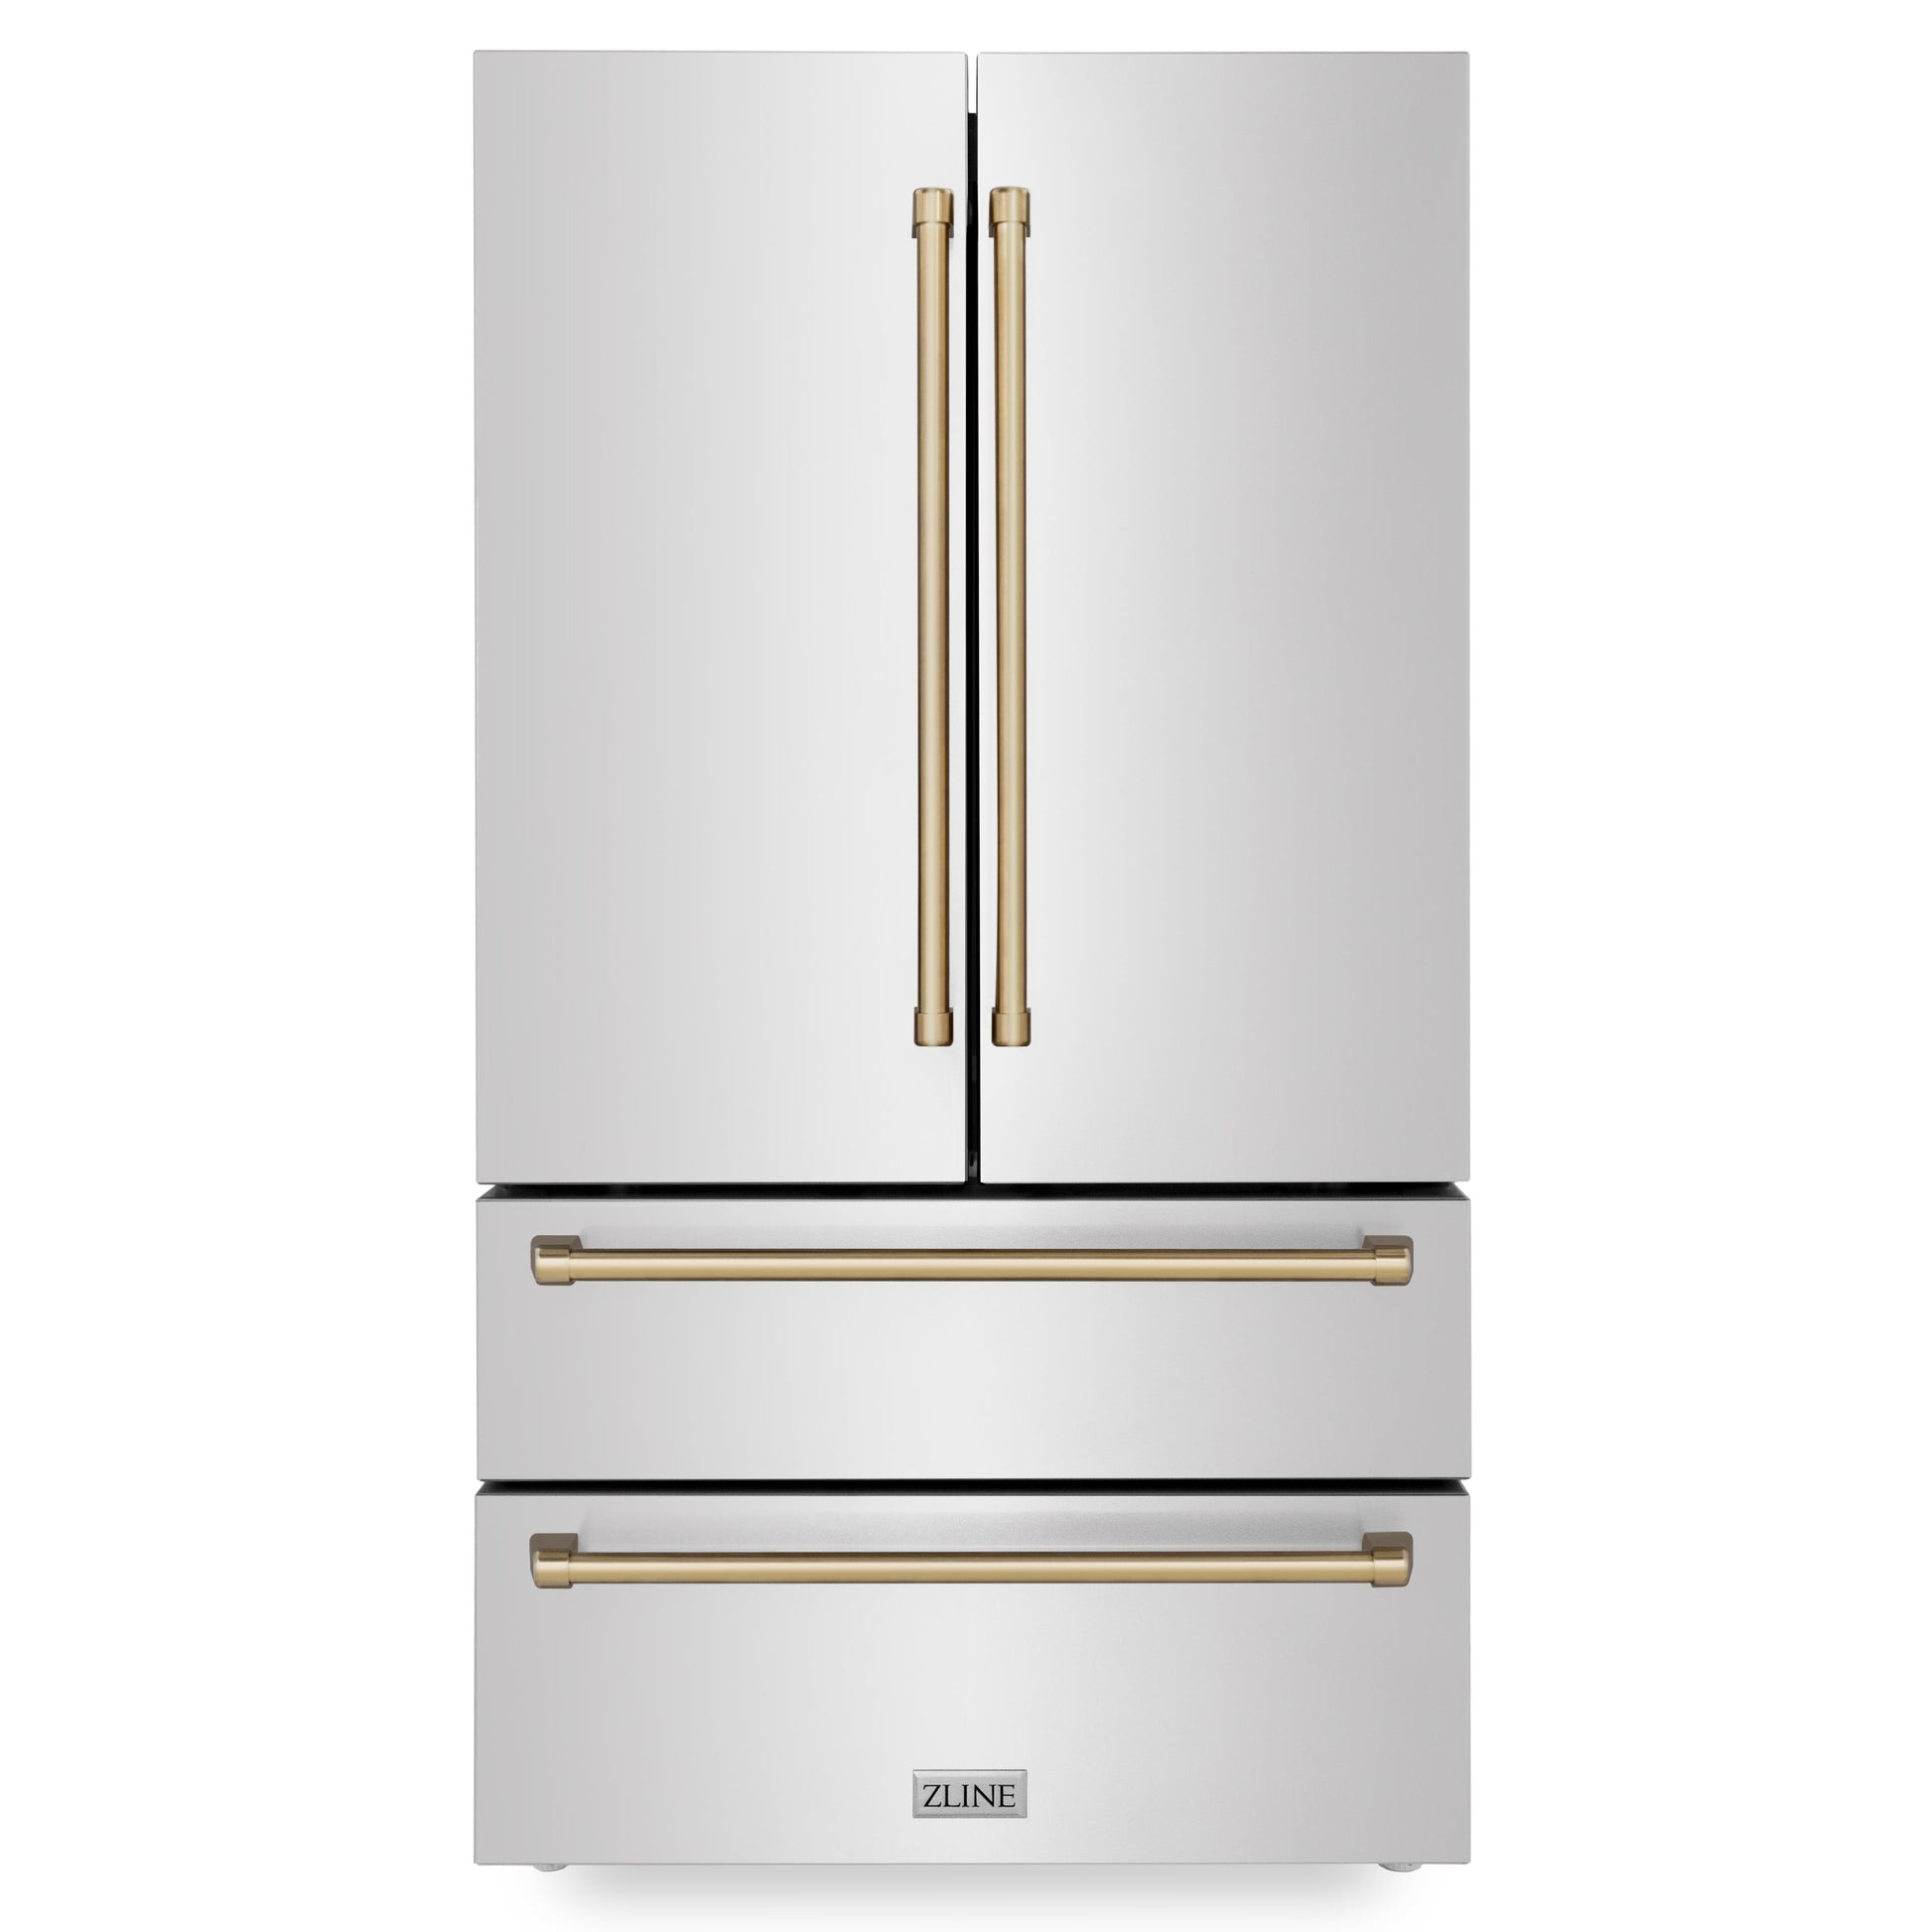 ZLINE 48" Autograph Edition 4 Appliance Package with Stainless Steel Dual Fuel Range, Range Hood, Dishwasher, and Refrigeration - Champagne Bronze Accents